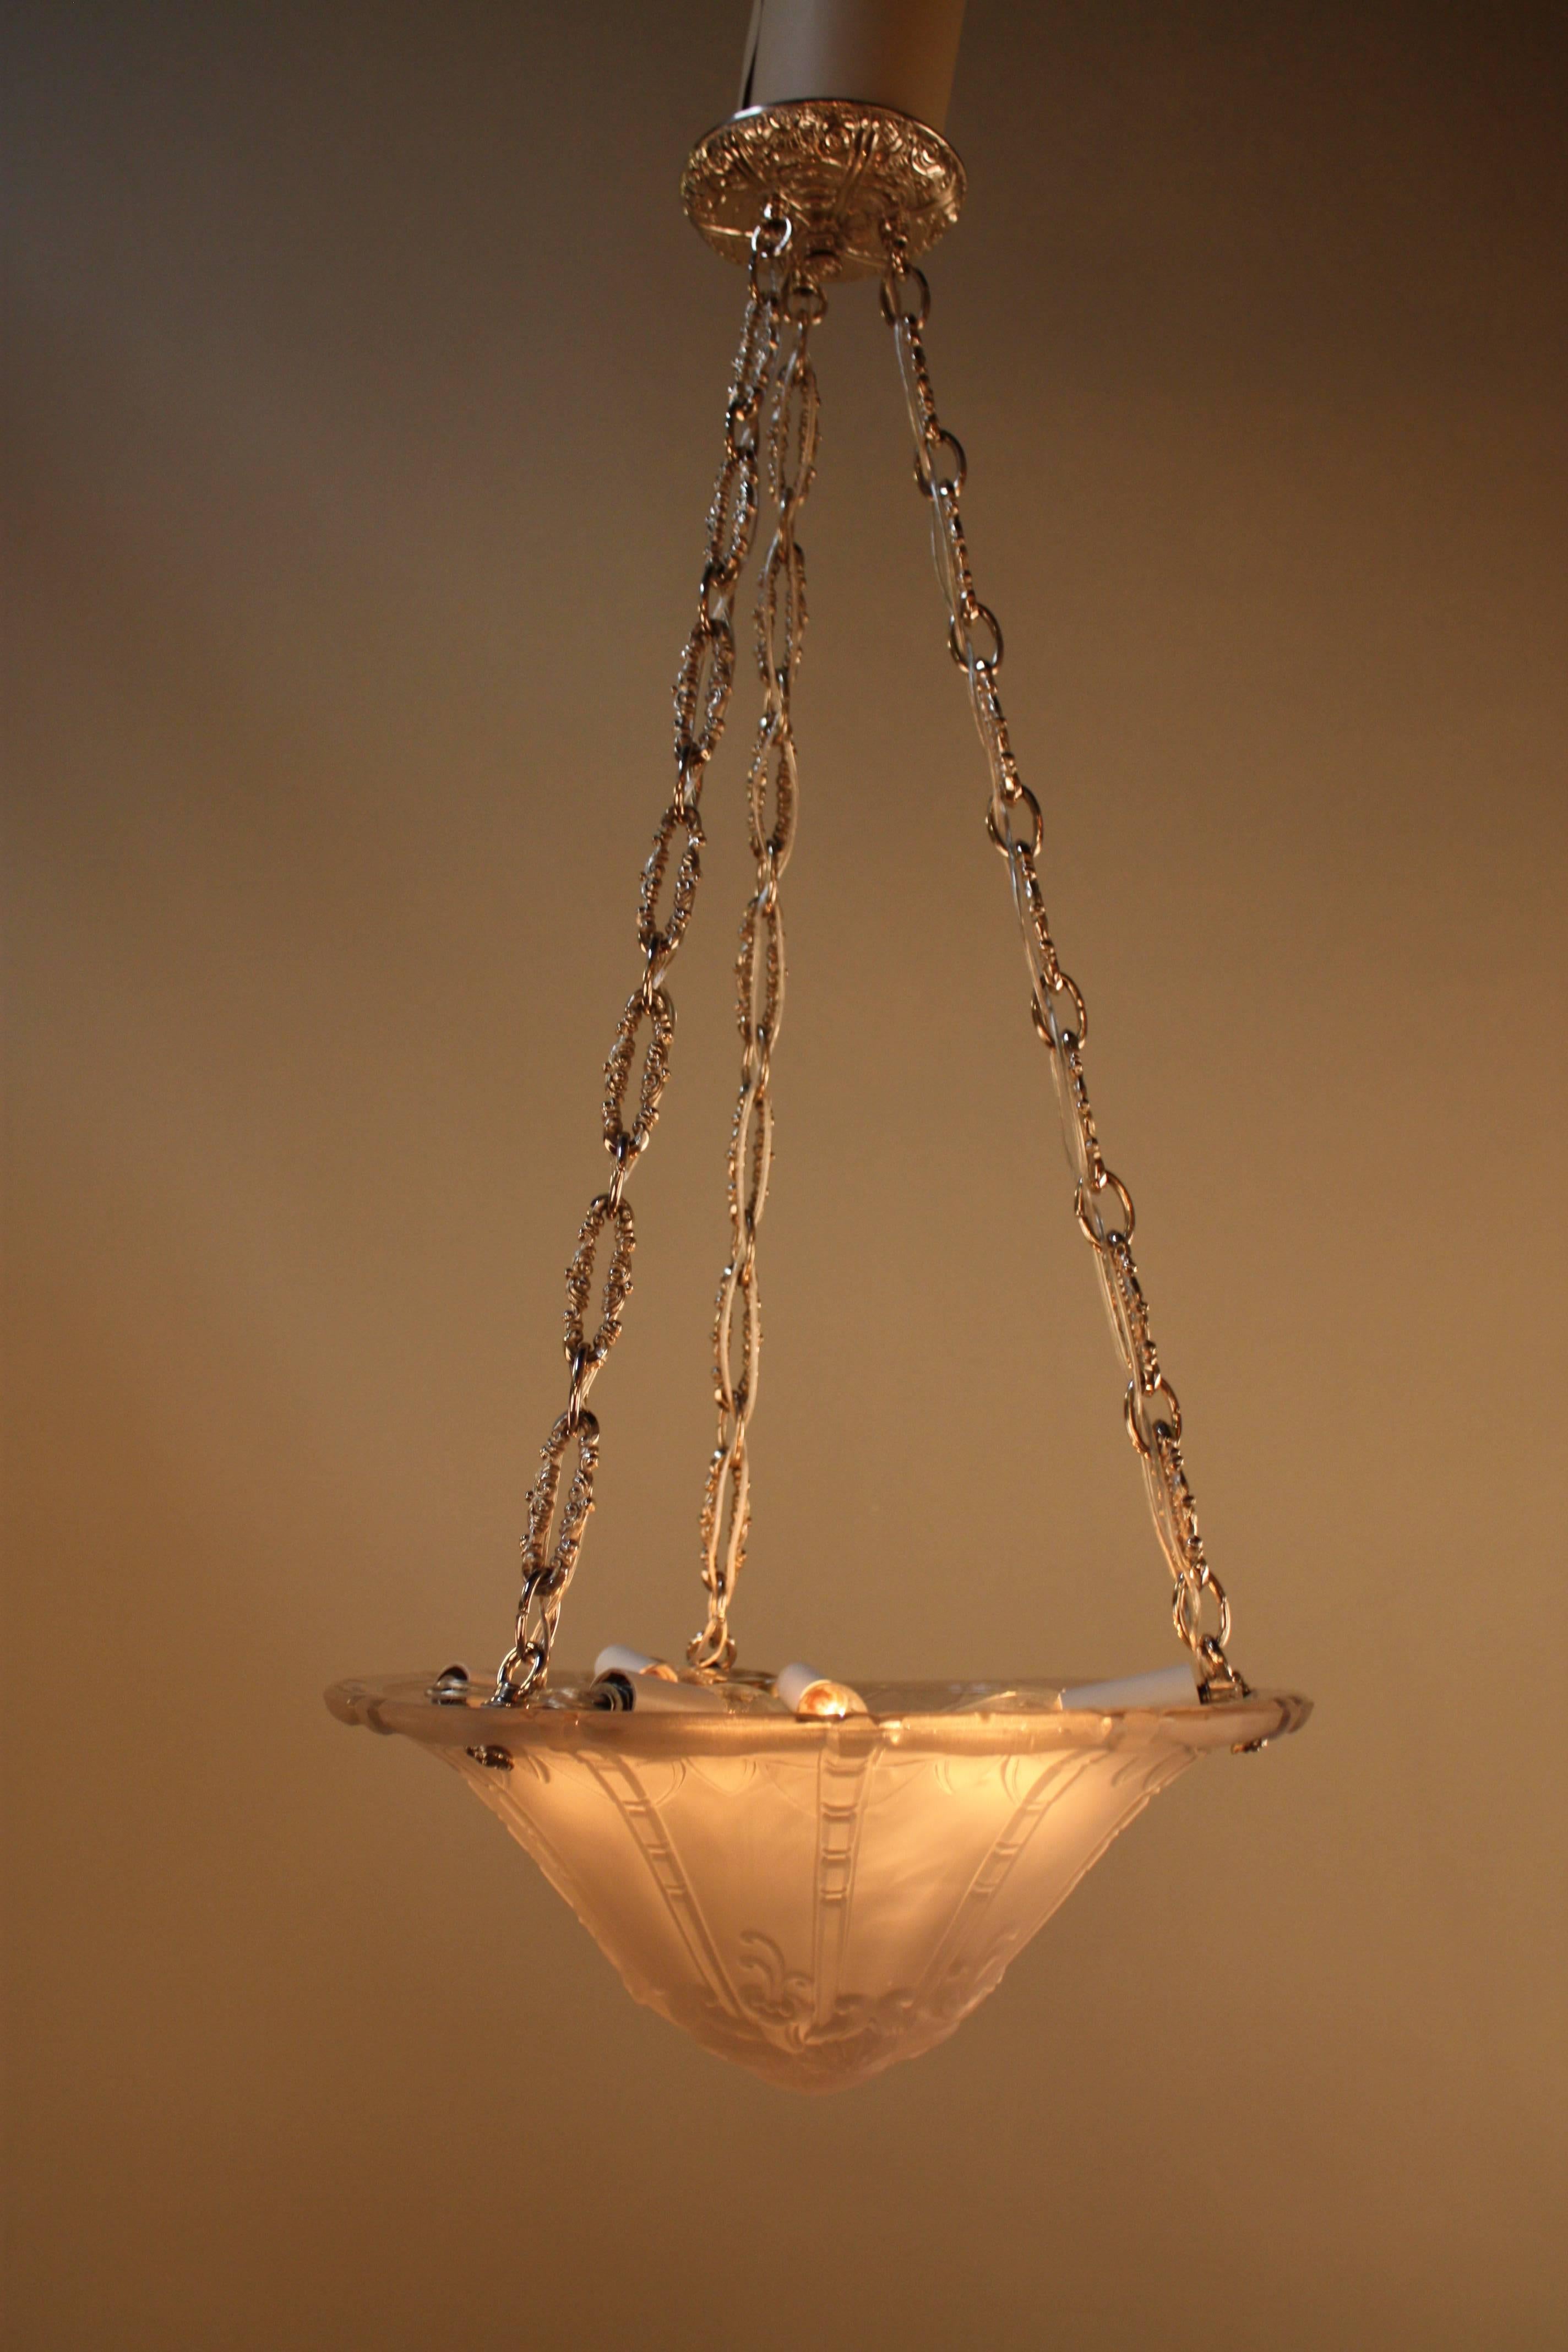 A fantastic six light Art Deco glass chandelier by Lorrain designed by Pierre D'Avesn for Daum Nancy.
Chain and canopy are nickel on bronze.
The height of this chandelier is 33